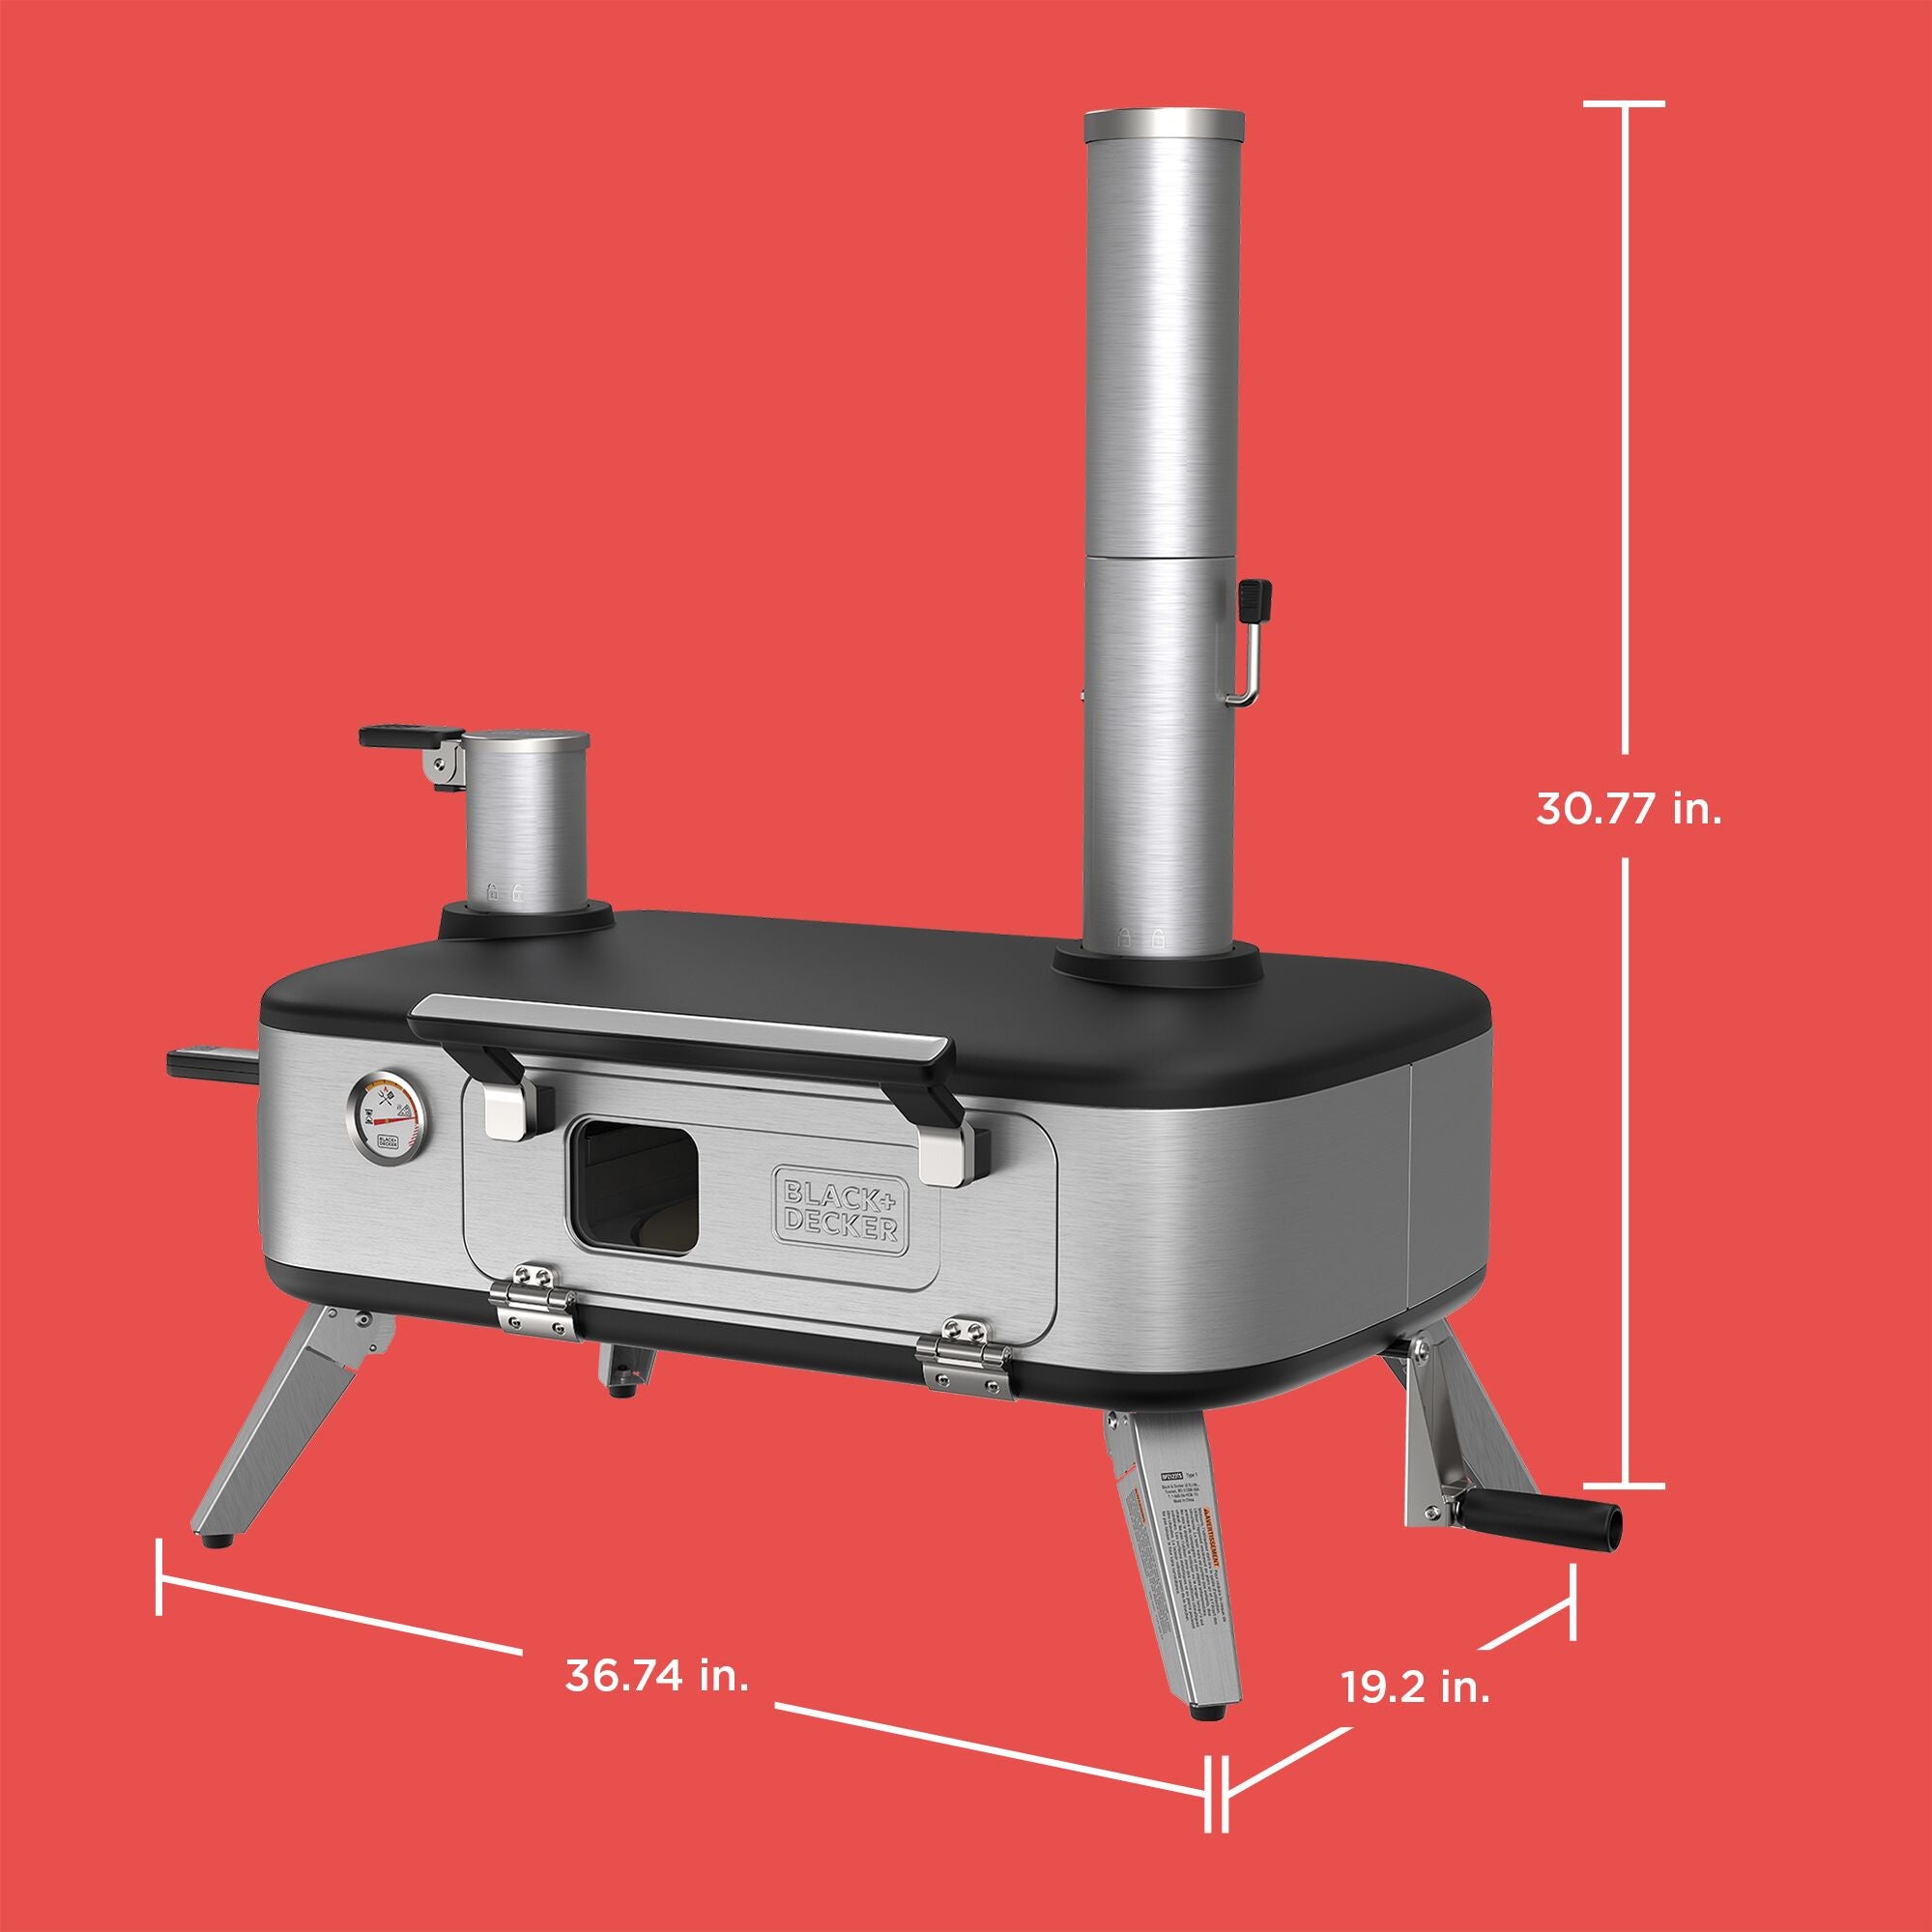 Dimensions of the pizza oven; height: 30.77 in., width: 19.2 in., width: 36.74 in.